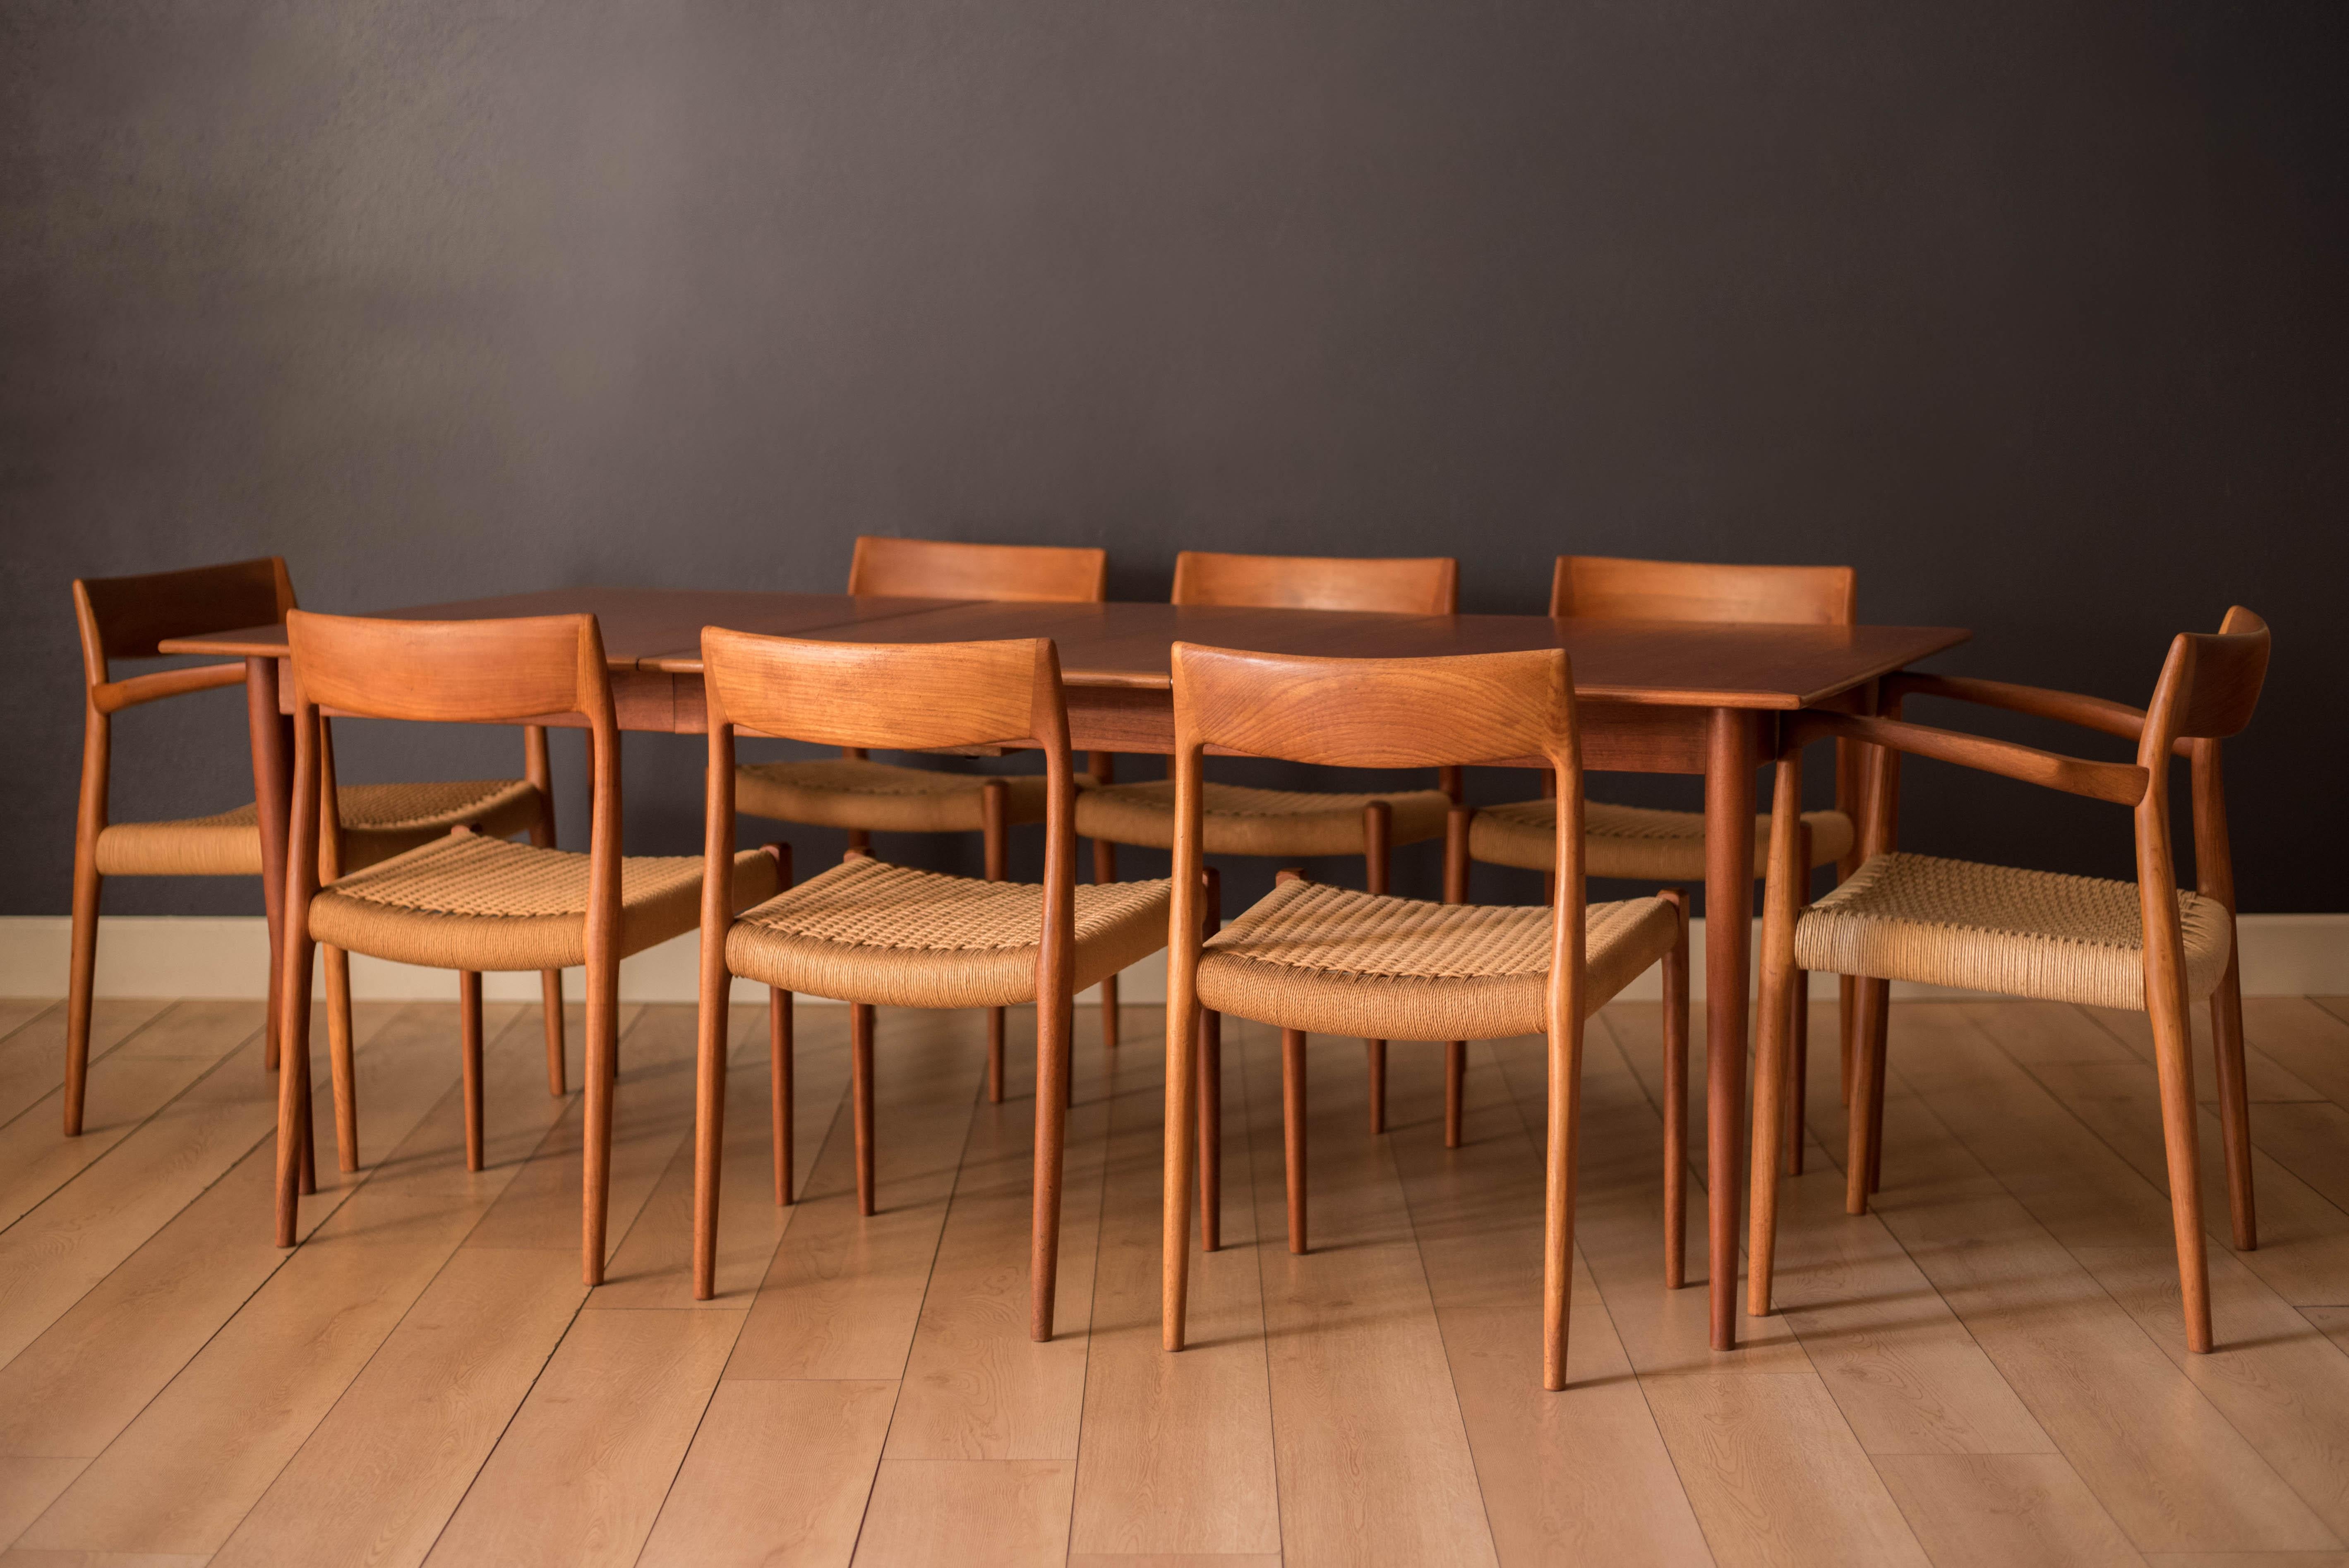 Mid-Century Modern dining chairs designed by Niels Otto Møller for J.L. Møller Møbelfabrik in teak, Denmark. This set includes six model no. 77 side chairs and two model no. 57 armchairs. Features natural woven paper cord seats and sculpted teak